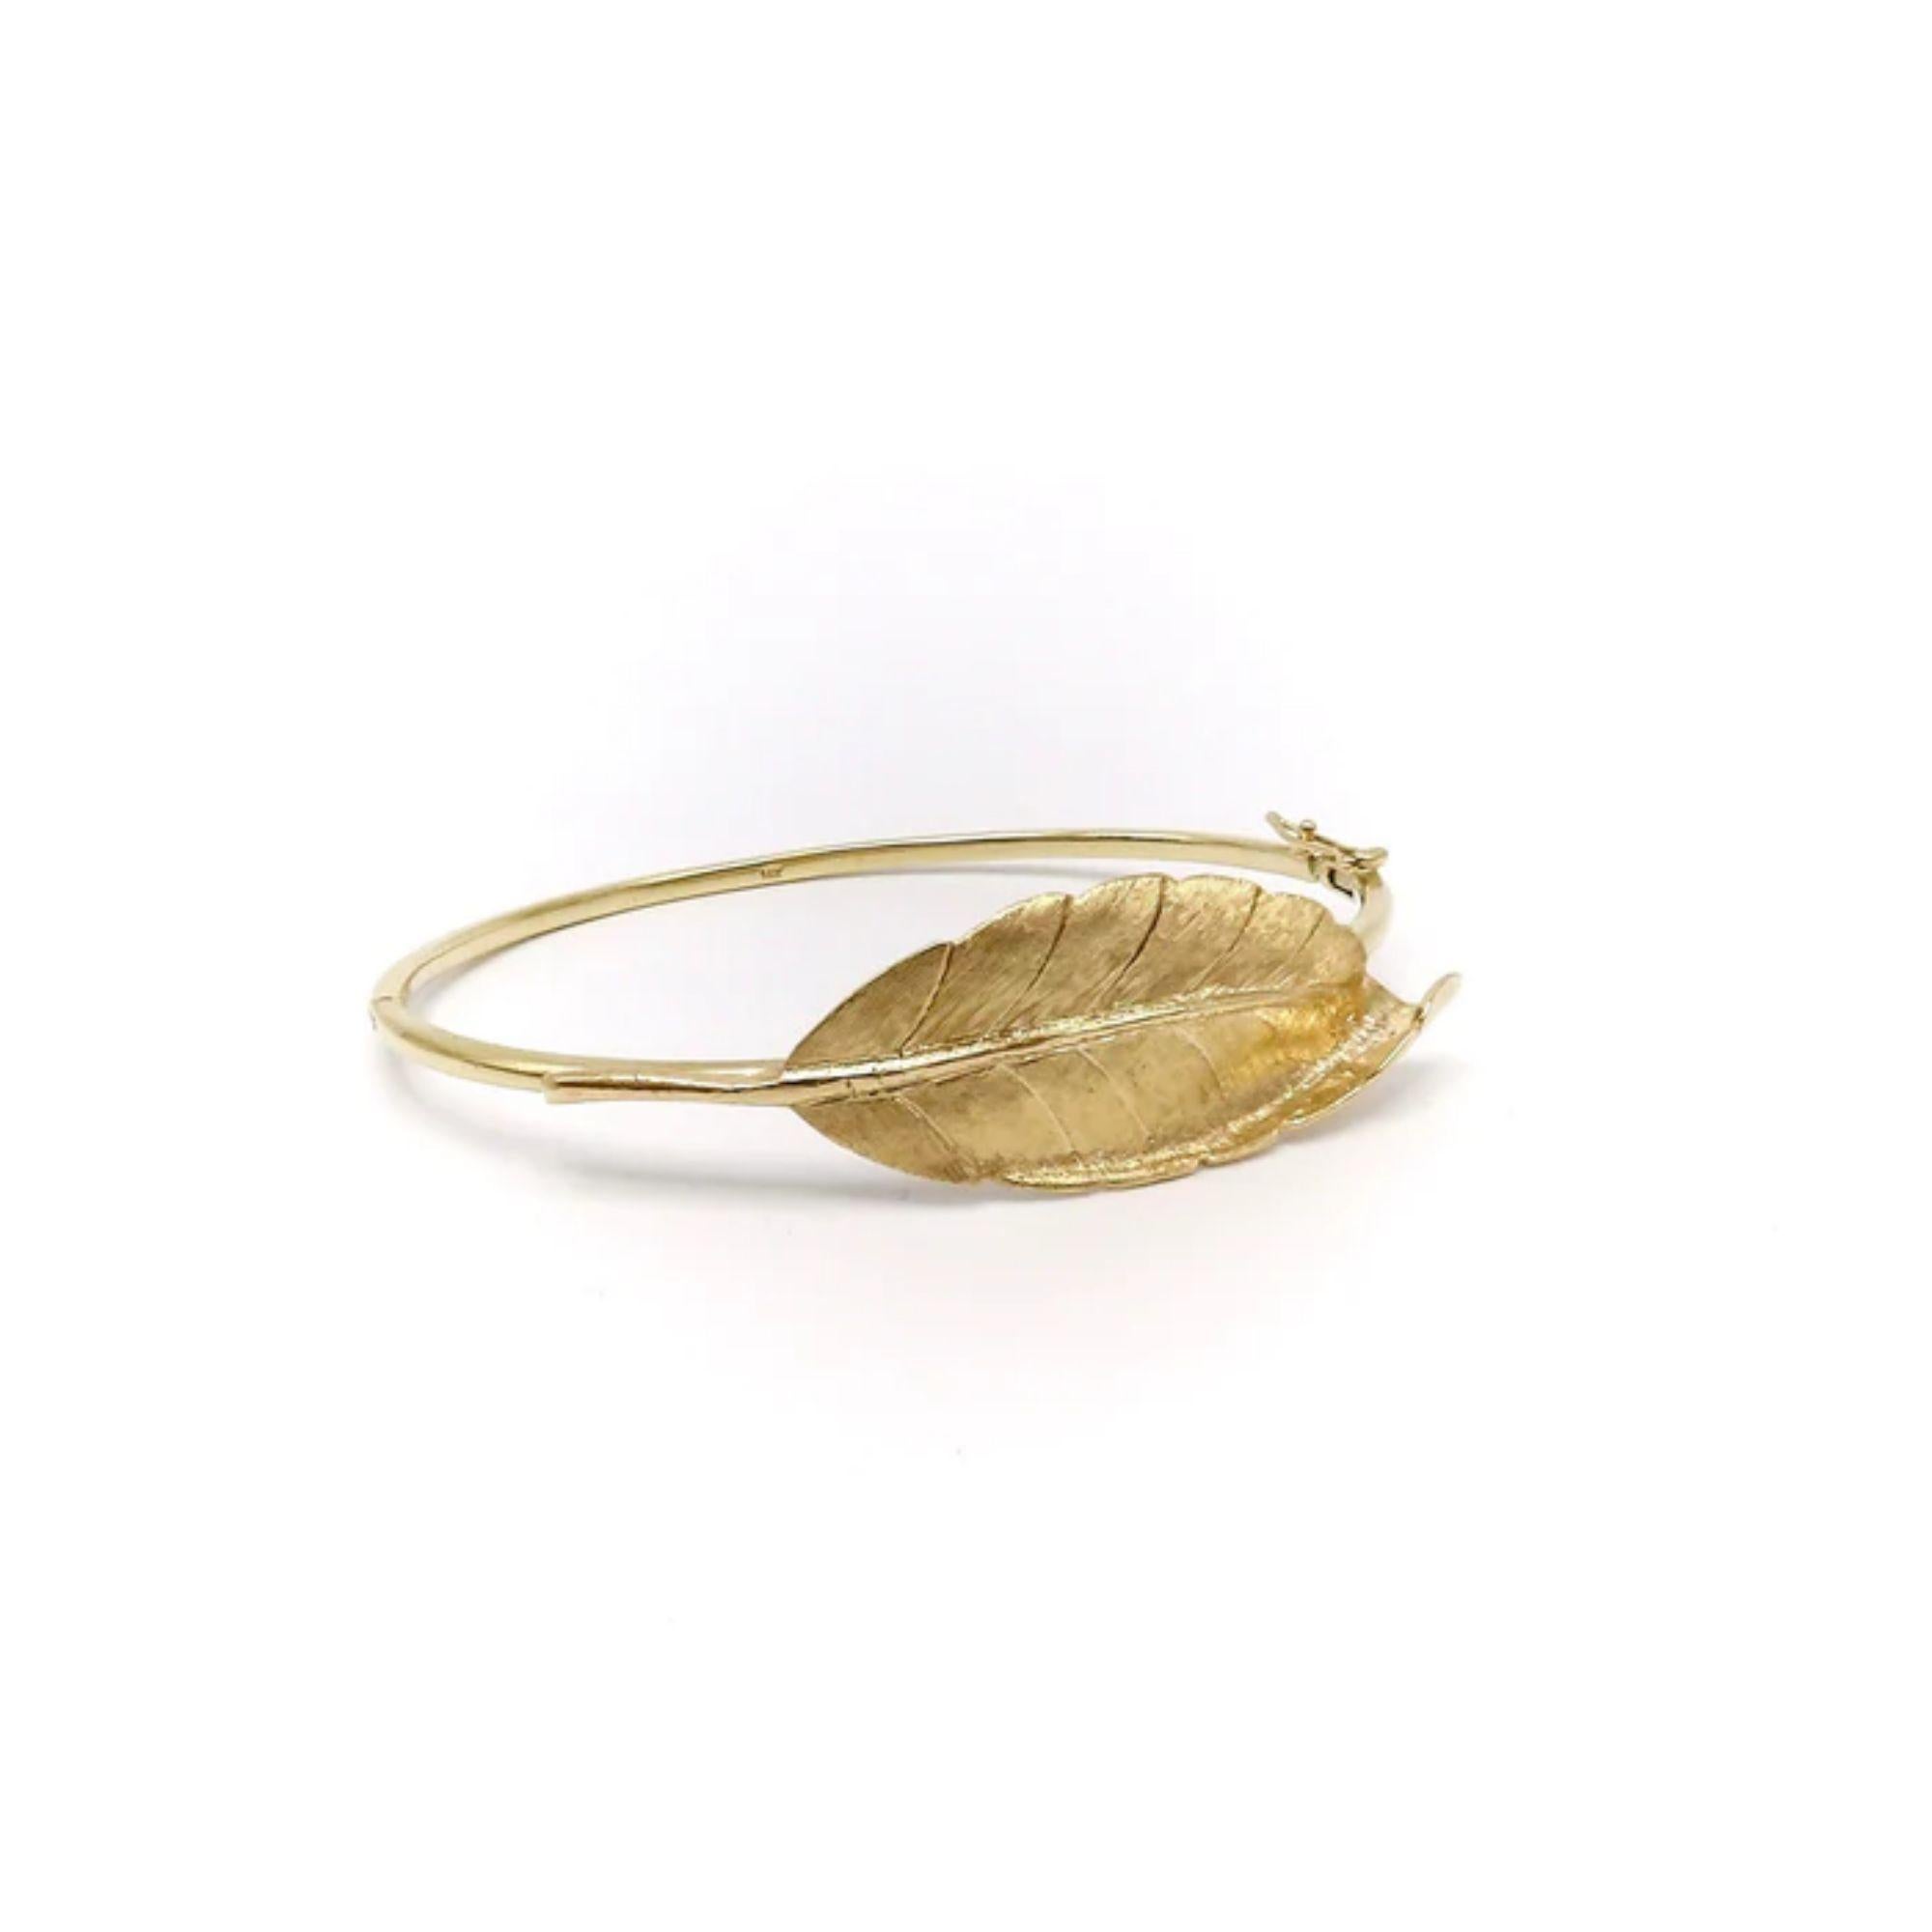 14K Gold Retro Leaf Bangle Bracelet
 
This is a beautiful 14 karat gold leaf bangle from our signature line. The stunning Florentine surface leaf was taken from a Retro brooch. One of the favorite parts of my jobs is reimagining elements of older